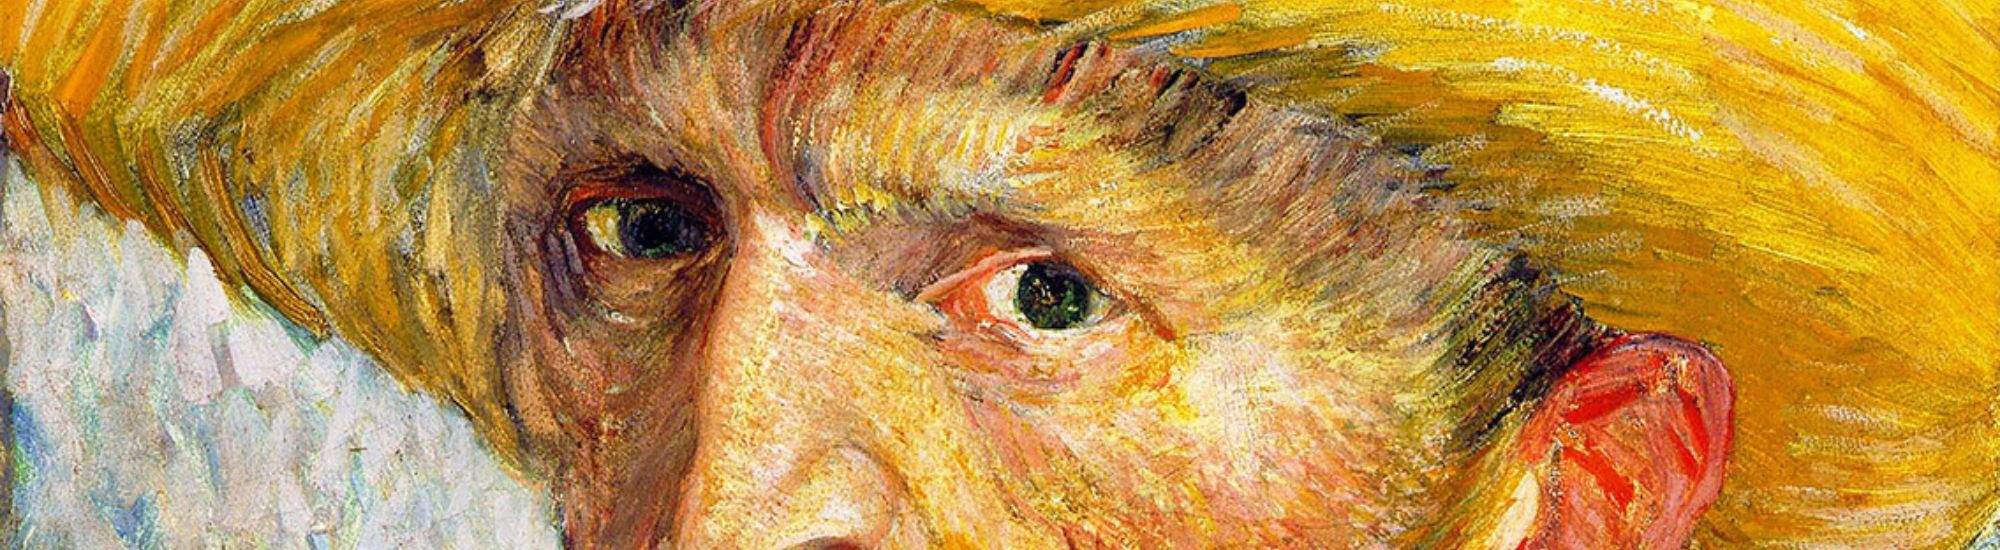 VAN GOGH Multi-Sensory Exhibition in Krakow: A Meeting with Great Art